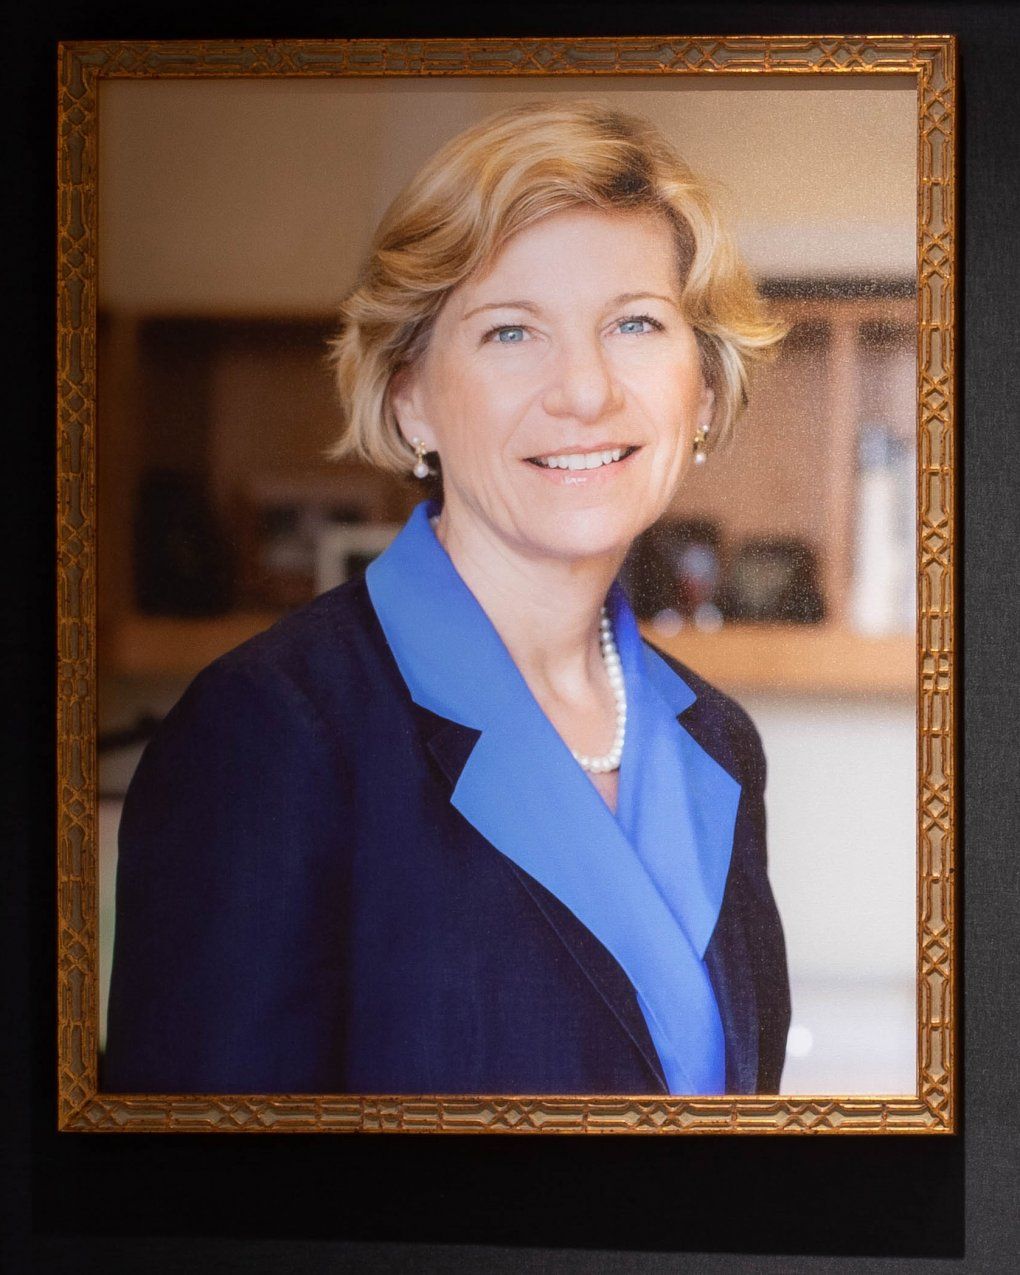 Susan Desmond-Hellmann smiles in an office in her official chancellor's portrait